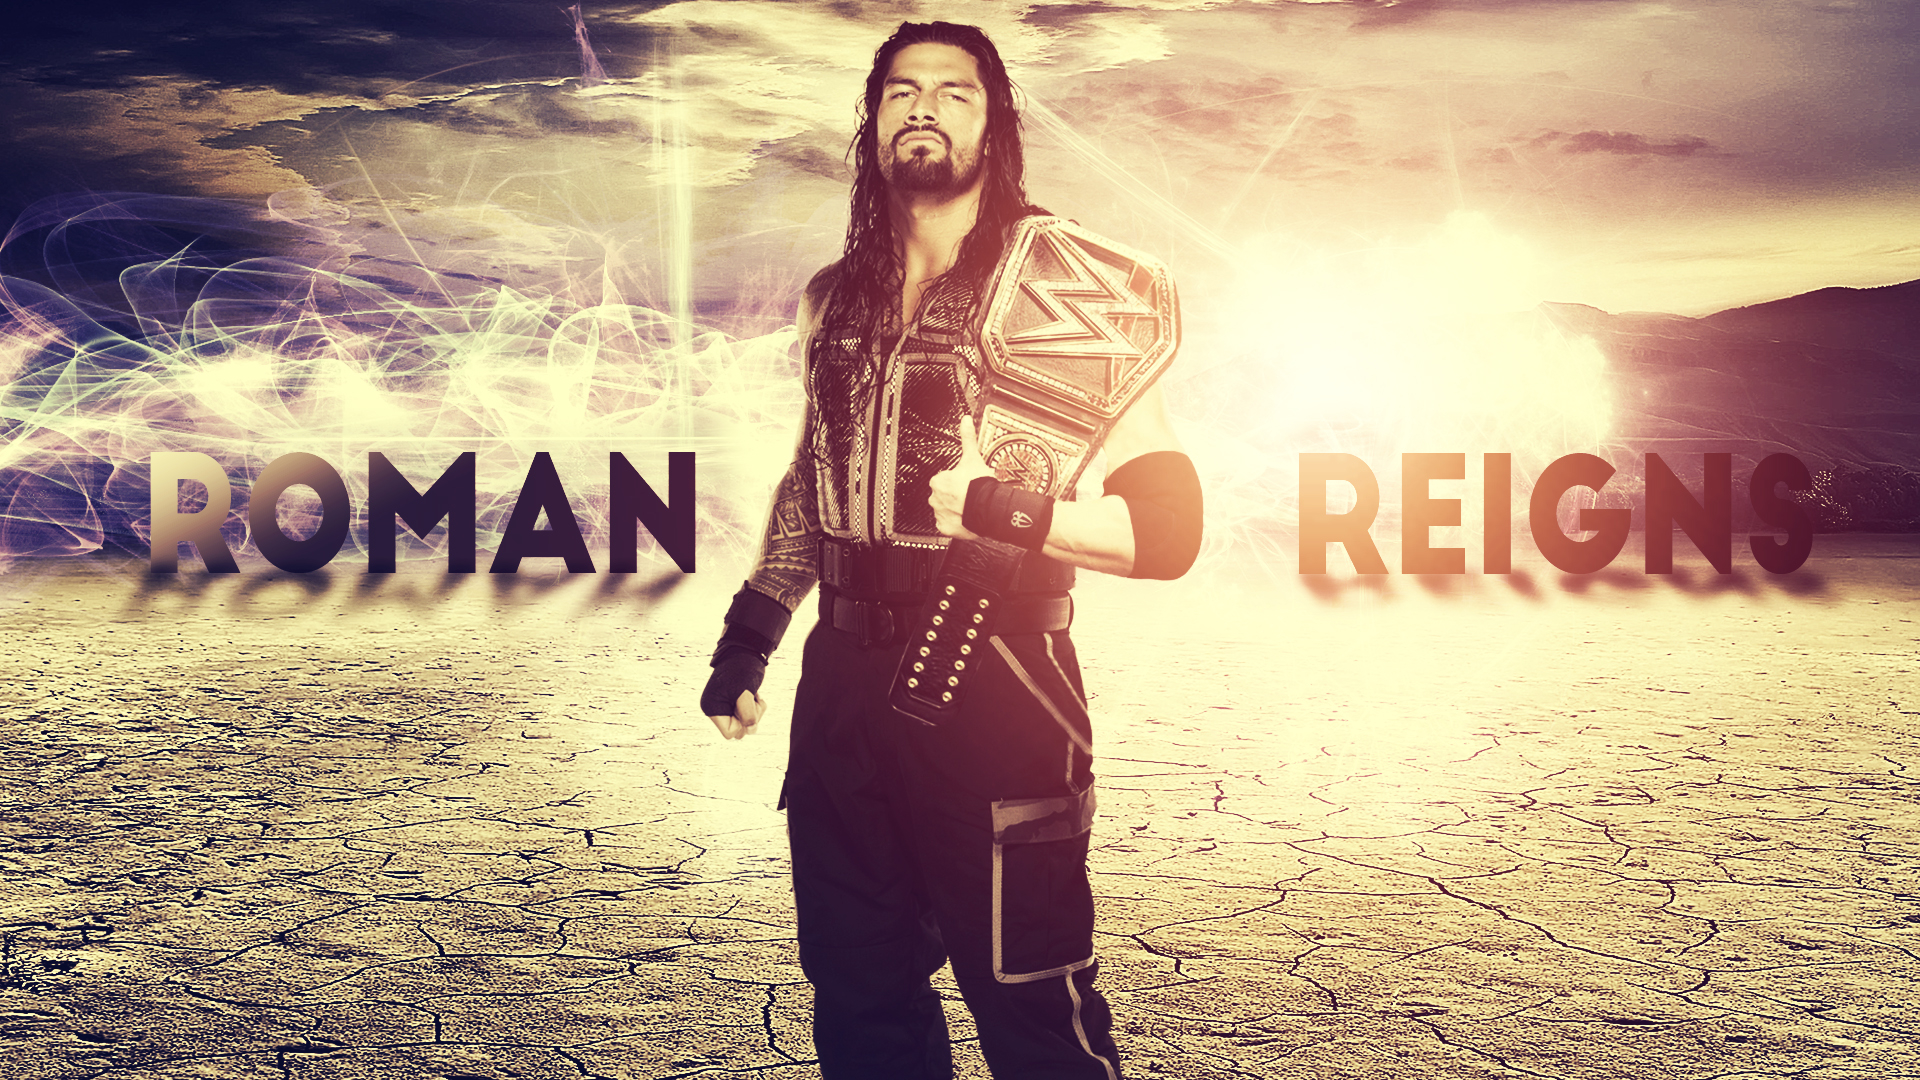 1280x80020 Roman Reigns WWE Champion 1280x80020 Resolution Wallpaper, HD  Celebrities 4K Wallpapers, Images, Photos and Background - Wallpapers Den